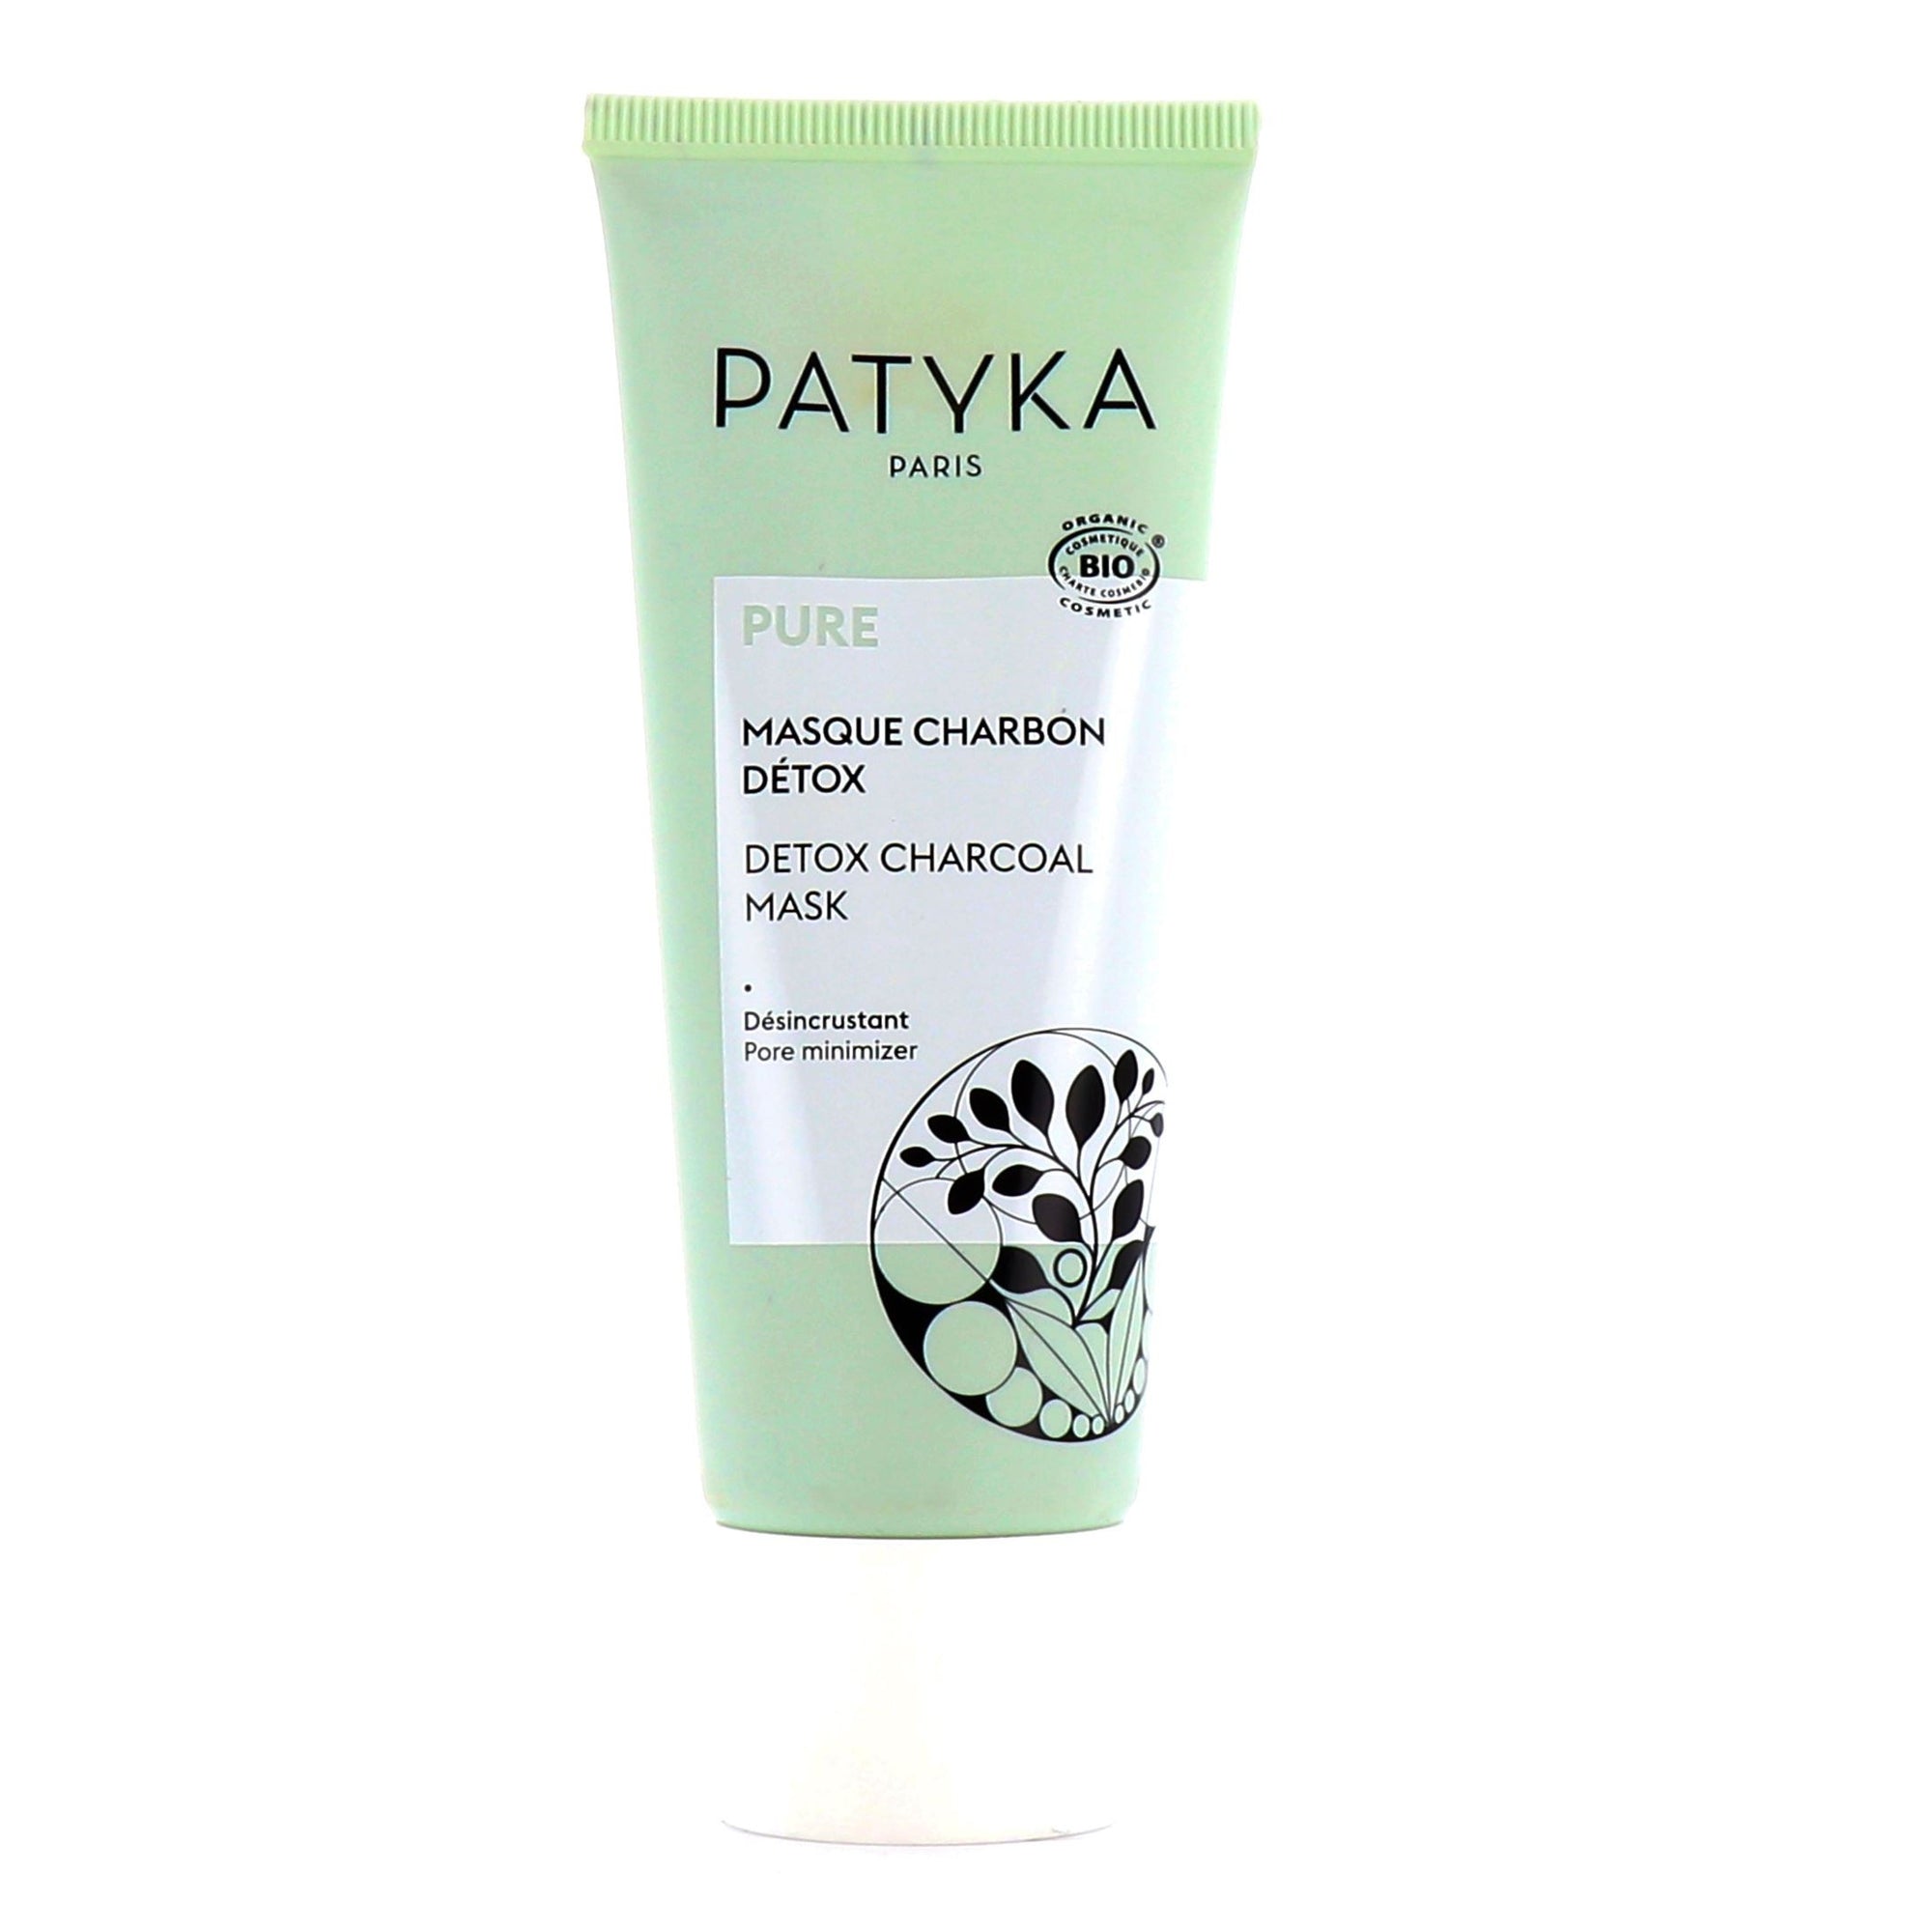 PATYKA - Natural Detox Charcoal Mask - Unclogs your Pores